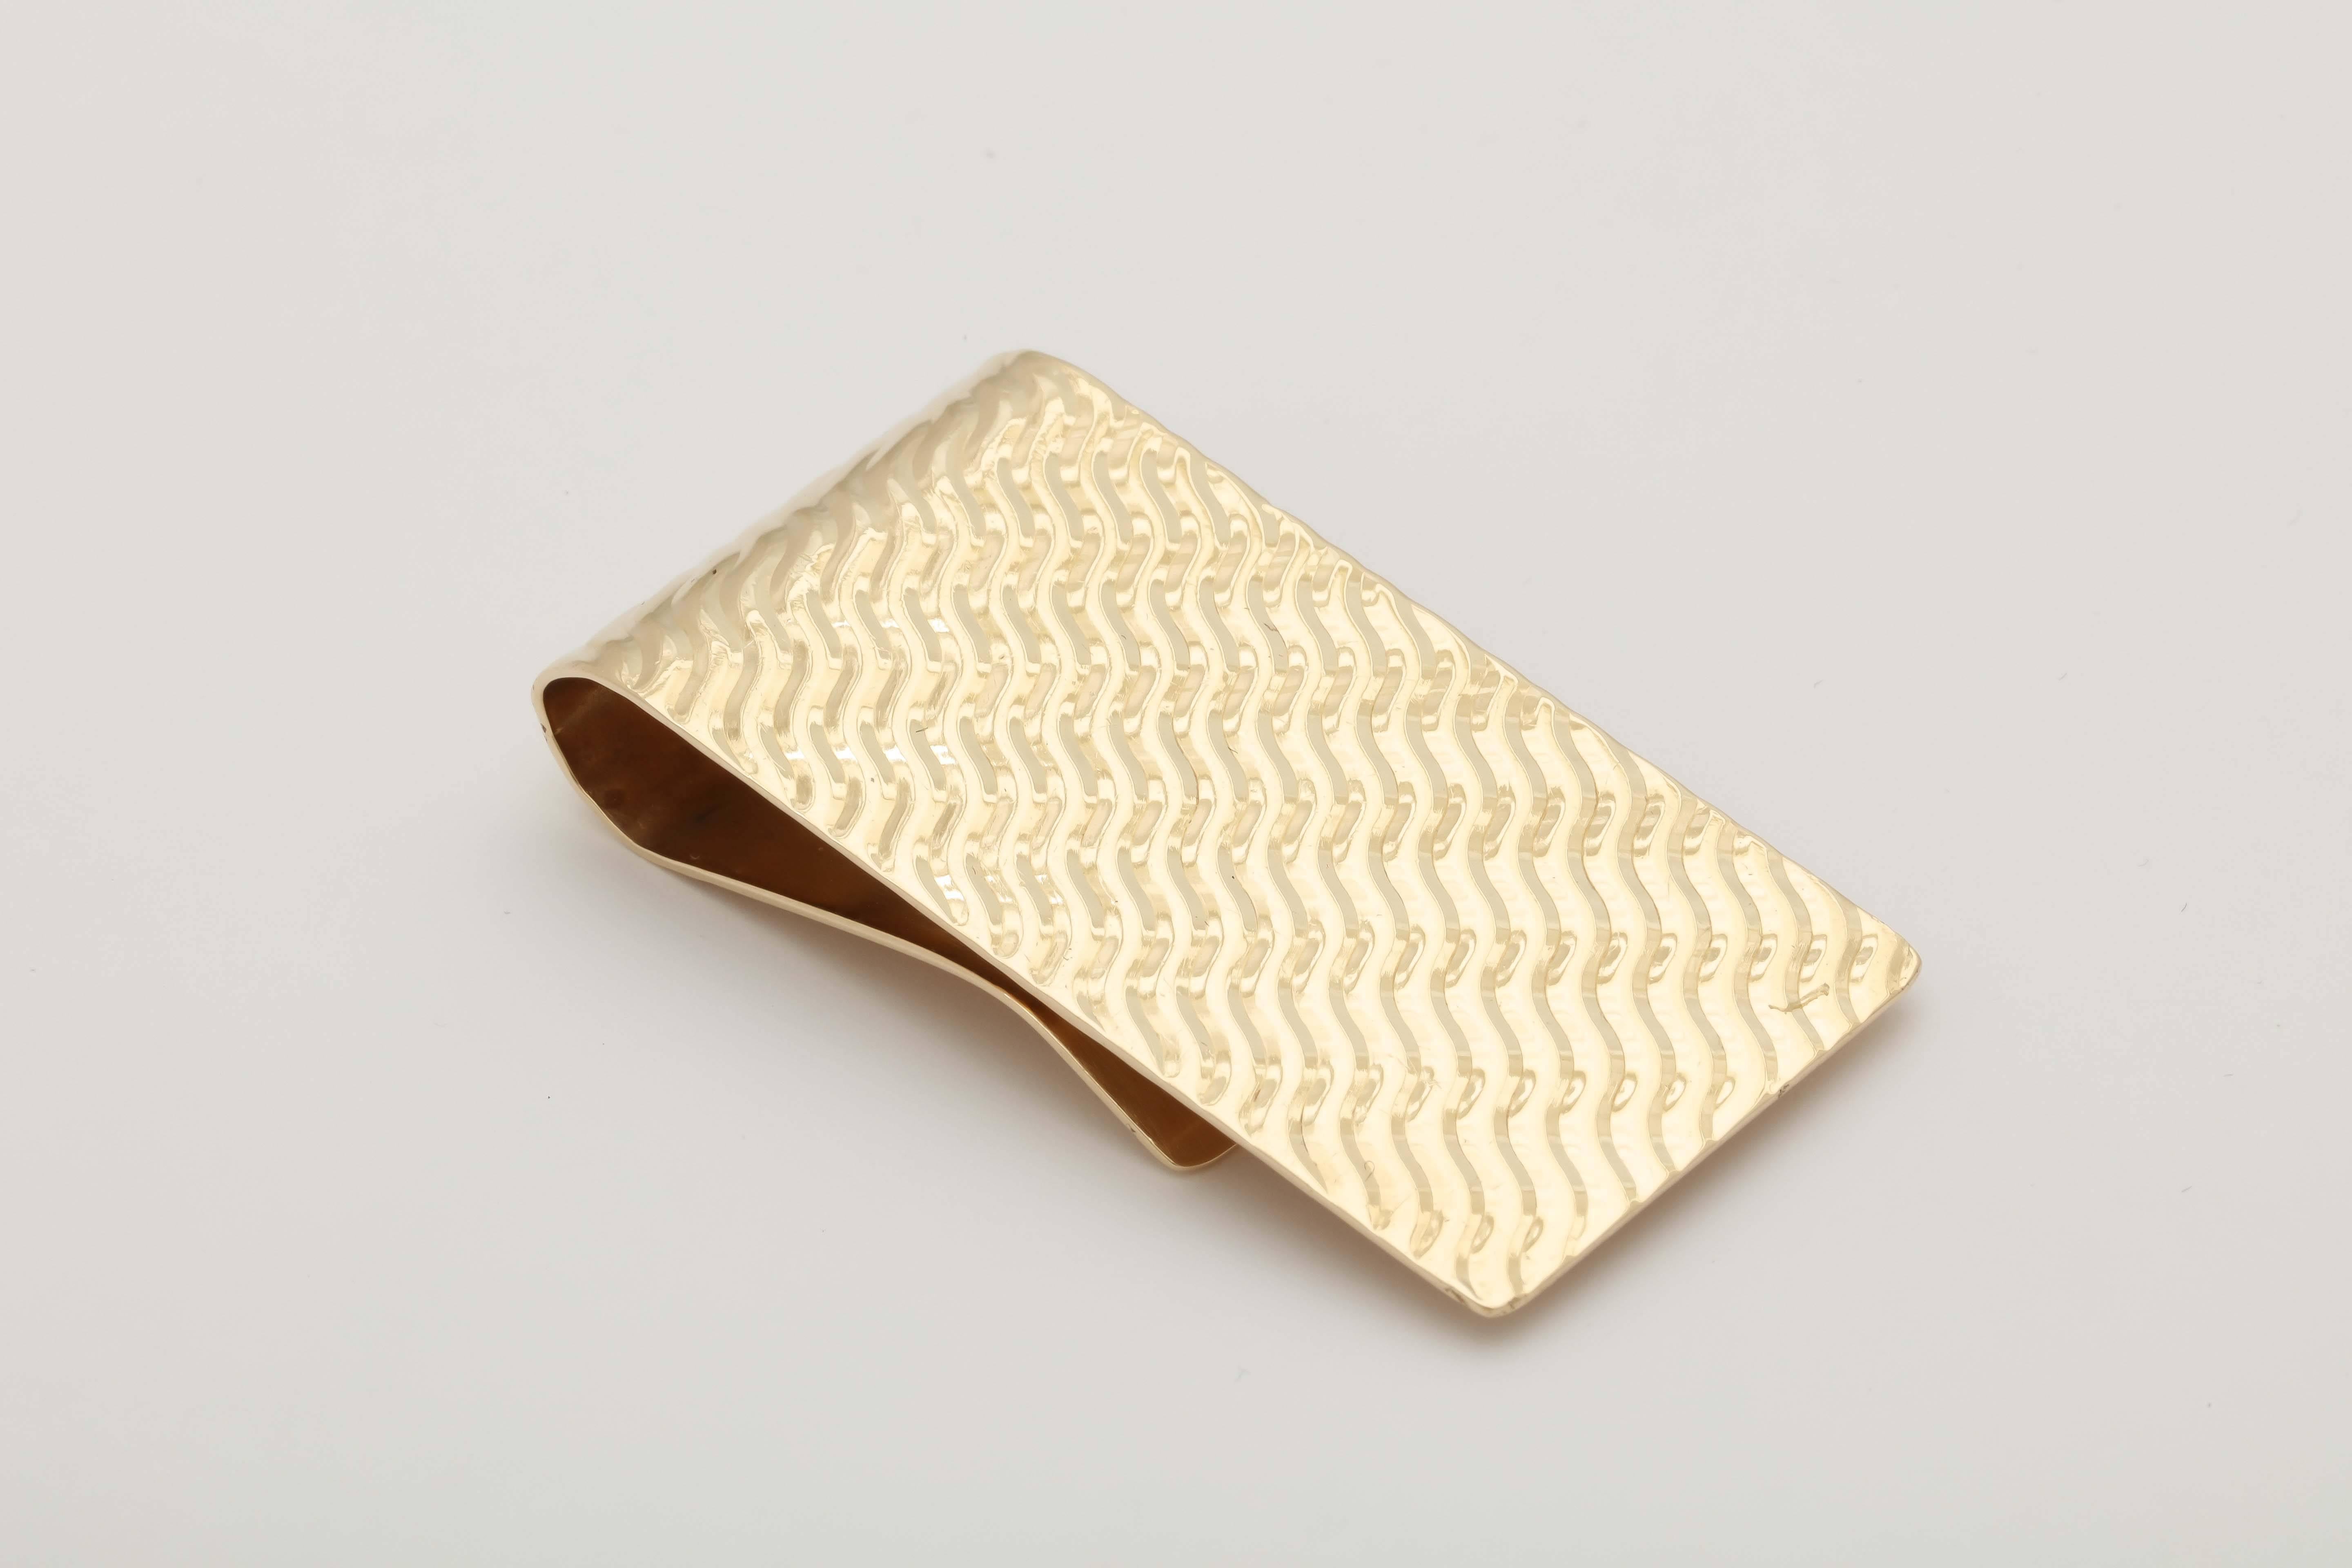 14kt Yellow Gold American Made Ridged Pattern Textured Money Clip Exhibiting A Diamond Cut Diagonal Design. This Is A Very Cool And Hip Money Clip.Signed By Cartier And Created In The 1940's.